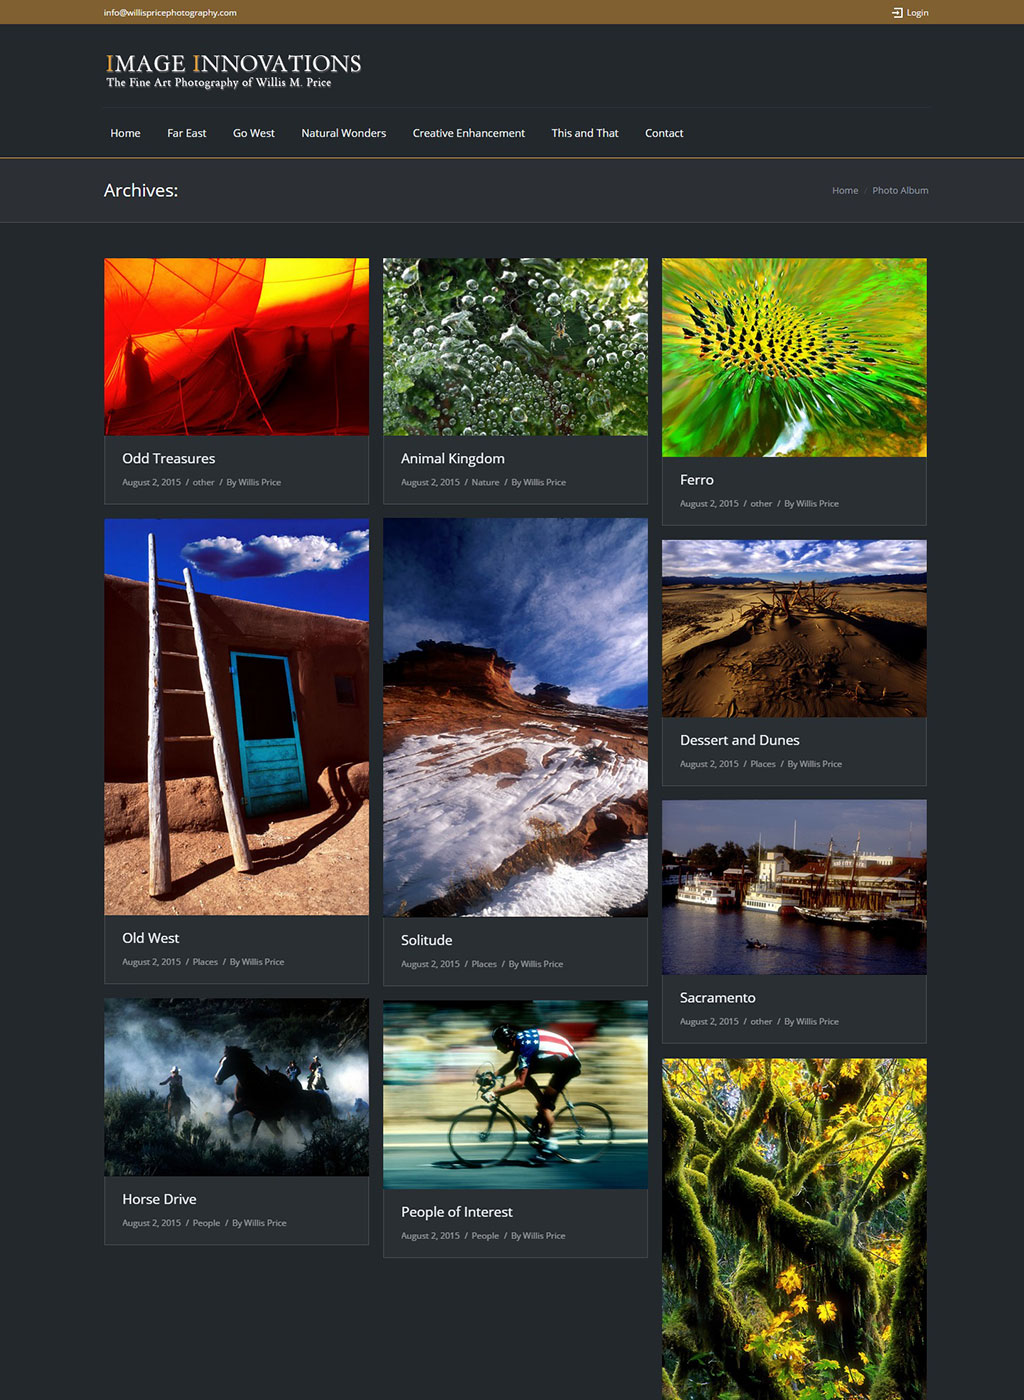 Fine art photography page of Image Innovations